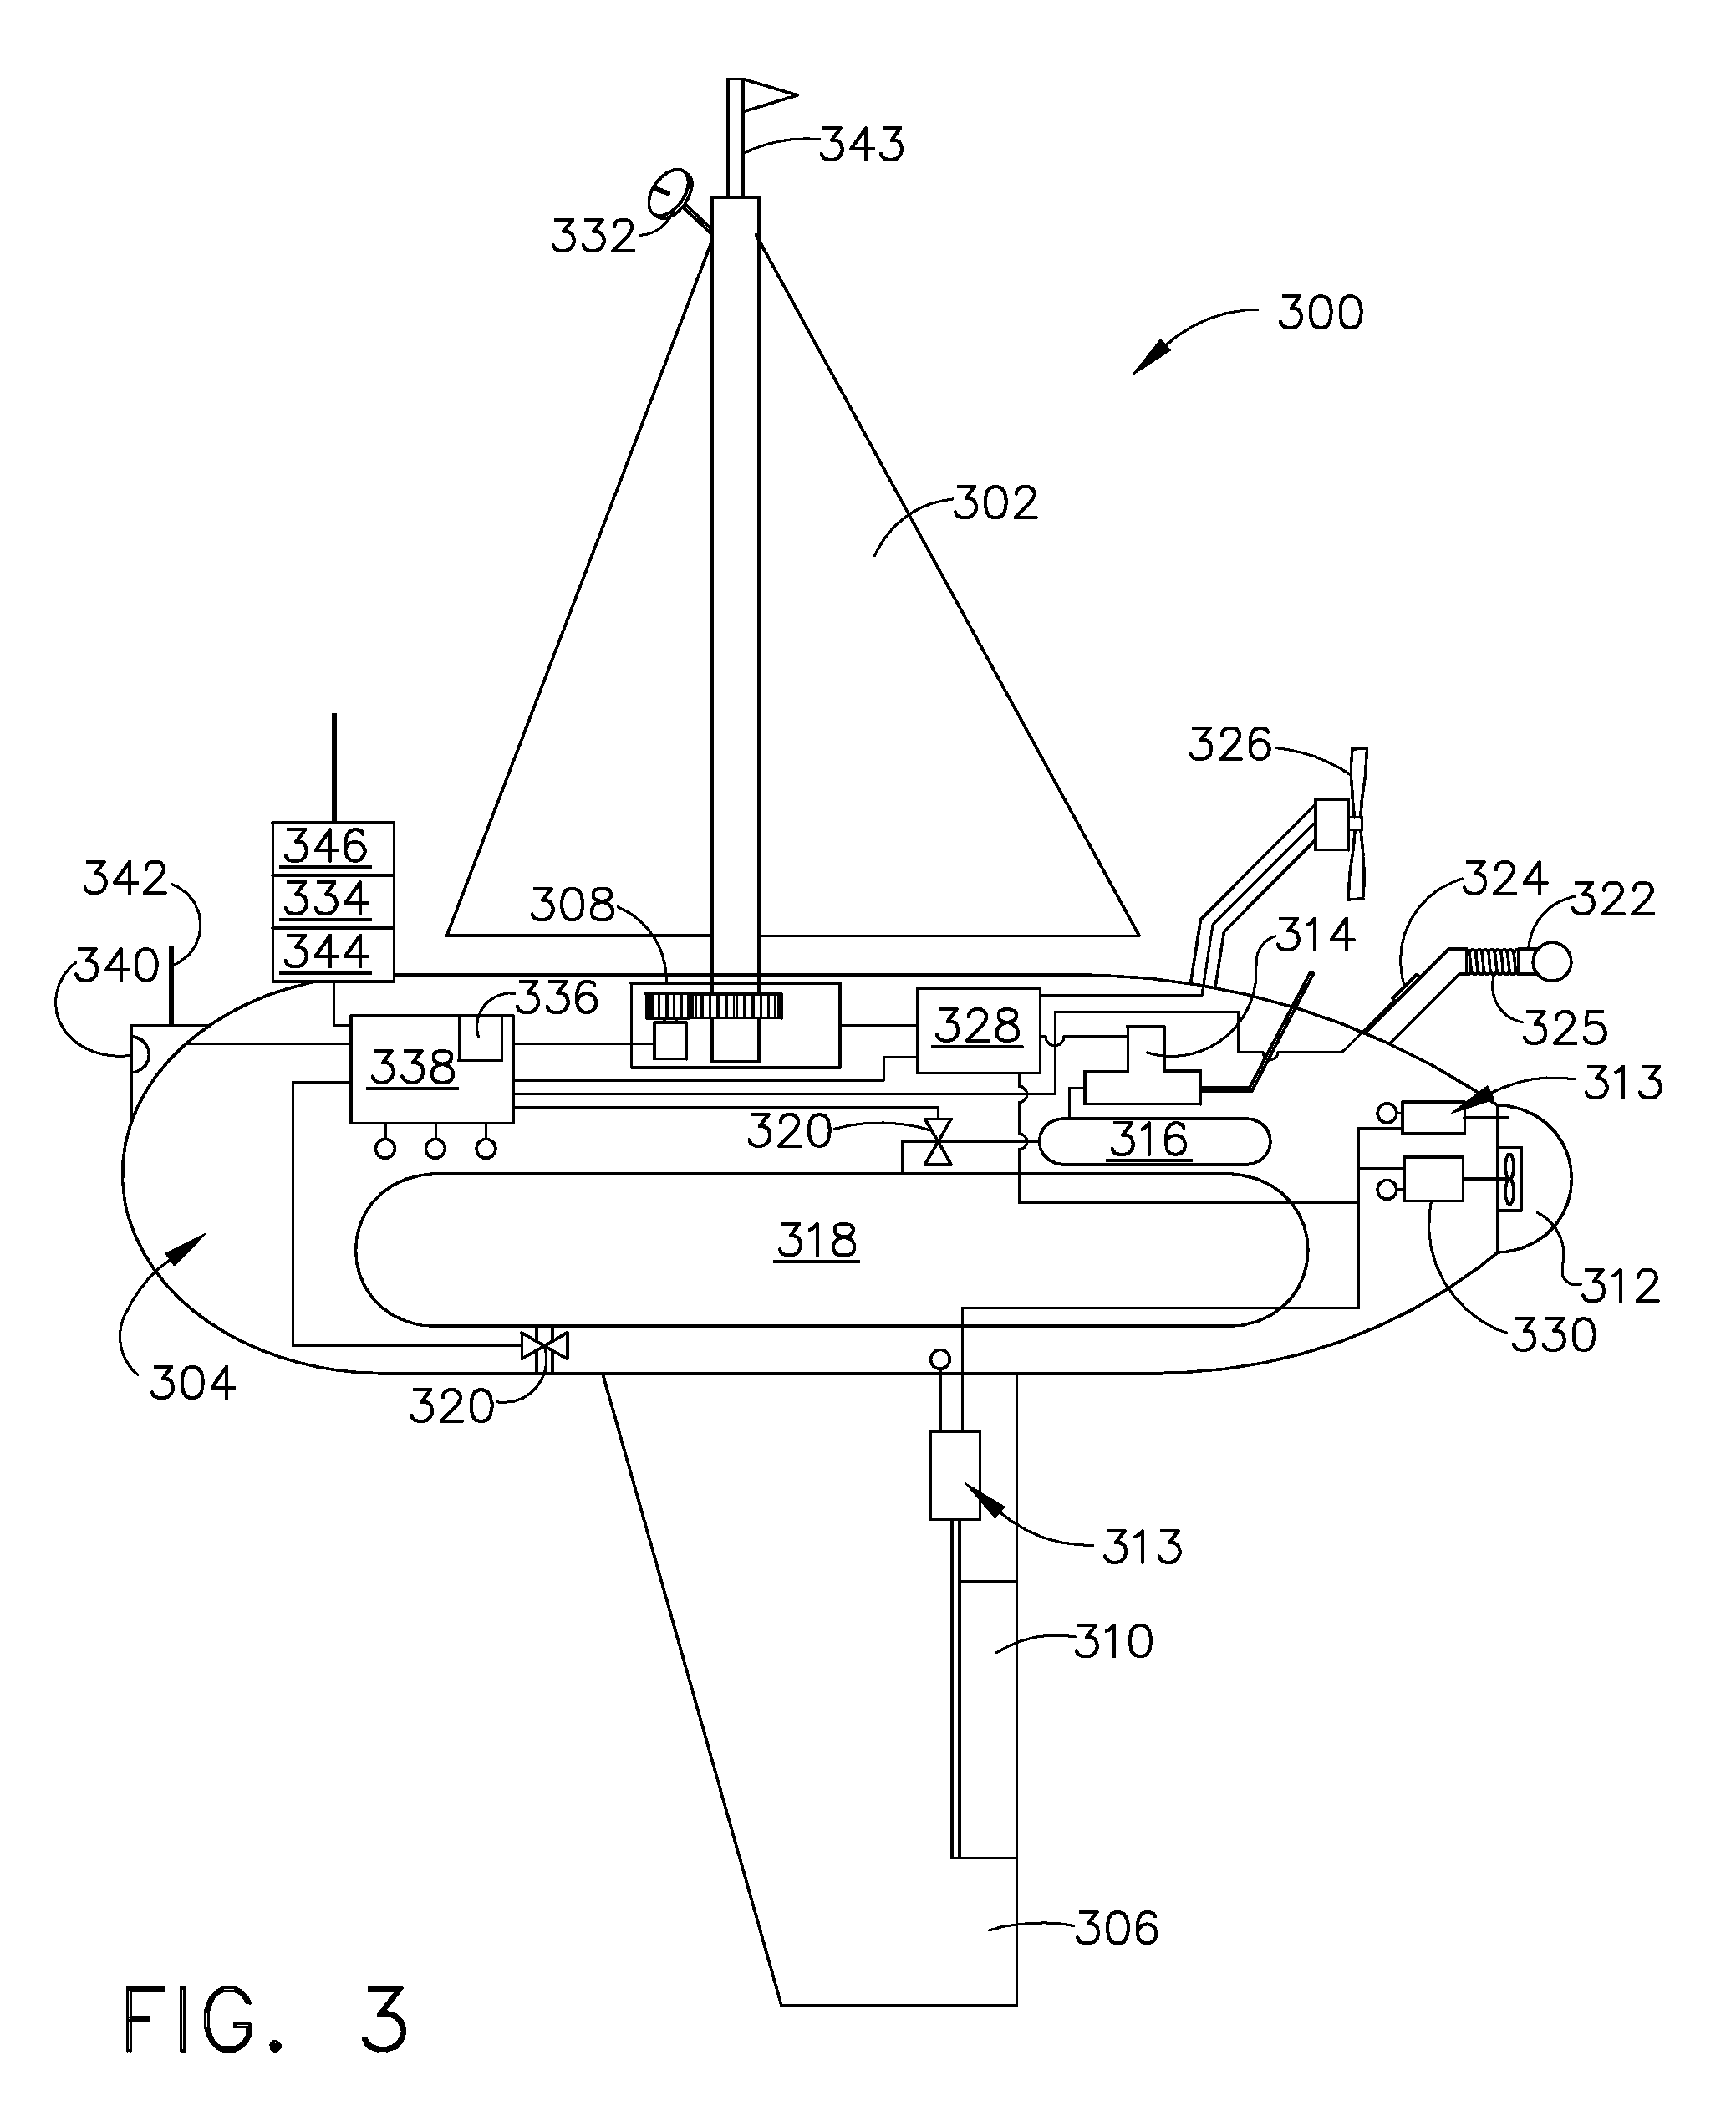 Method and apparatus for robotic ocean farming for food and energy